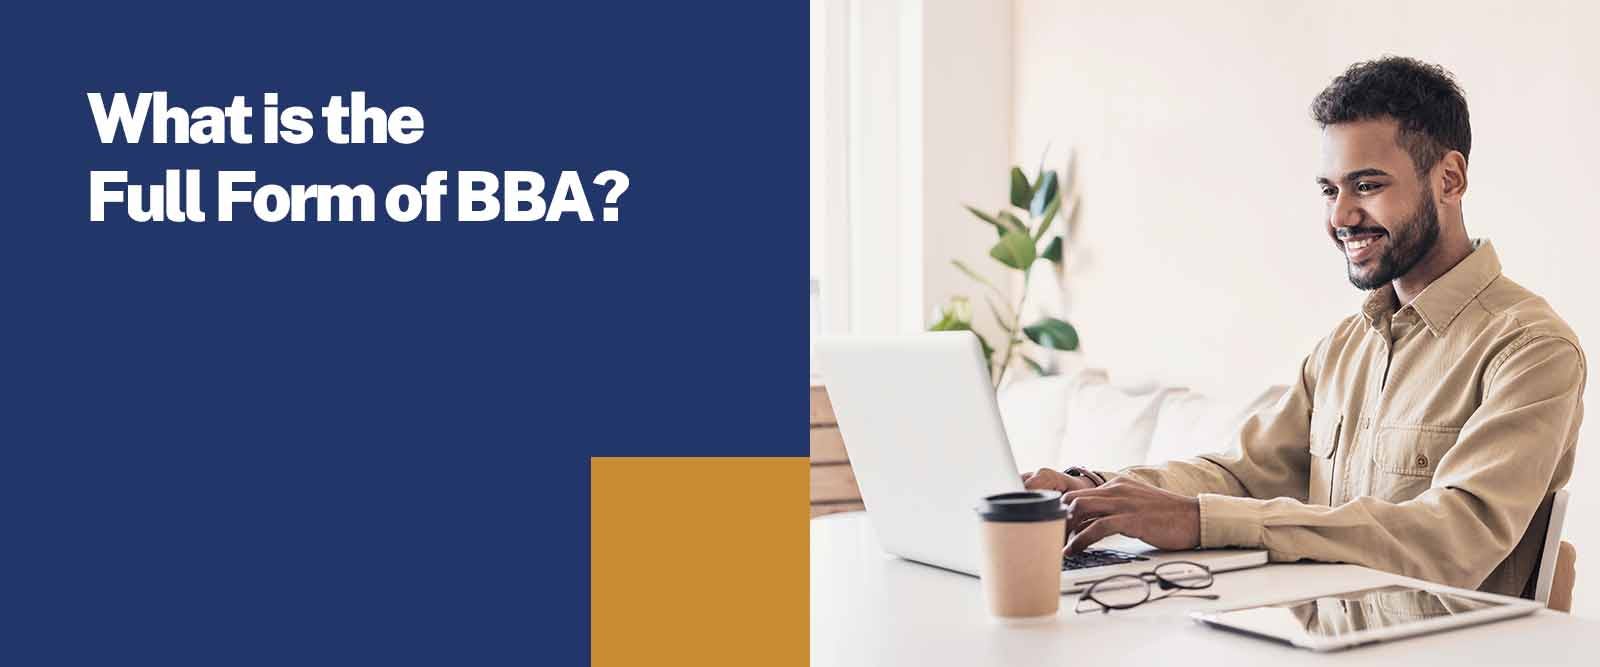 What is the Full Form of BBA?